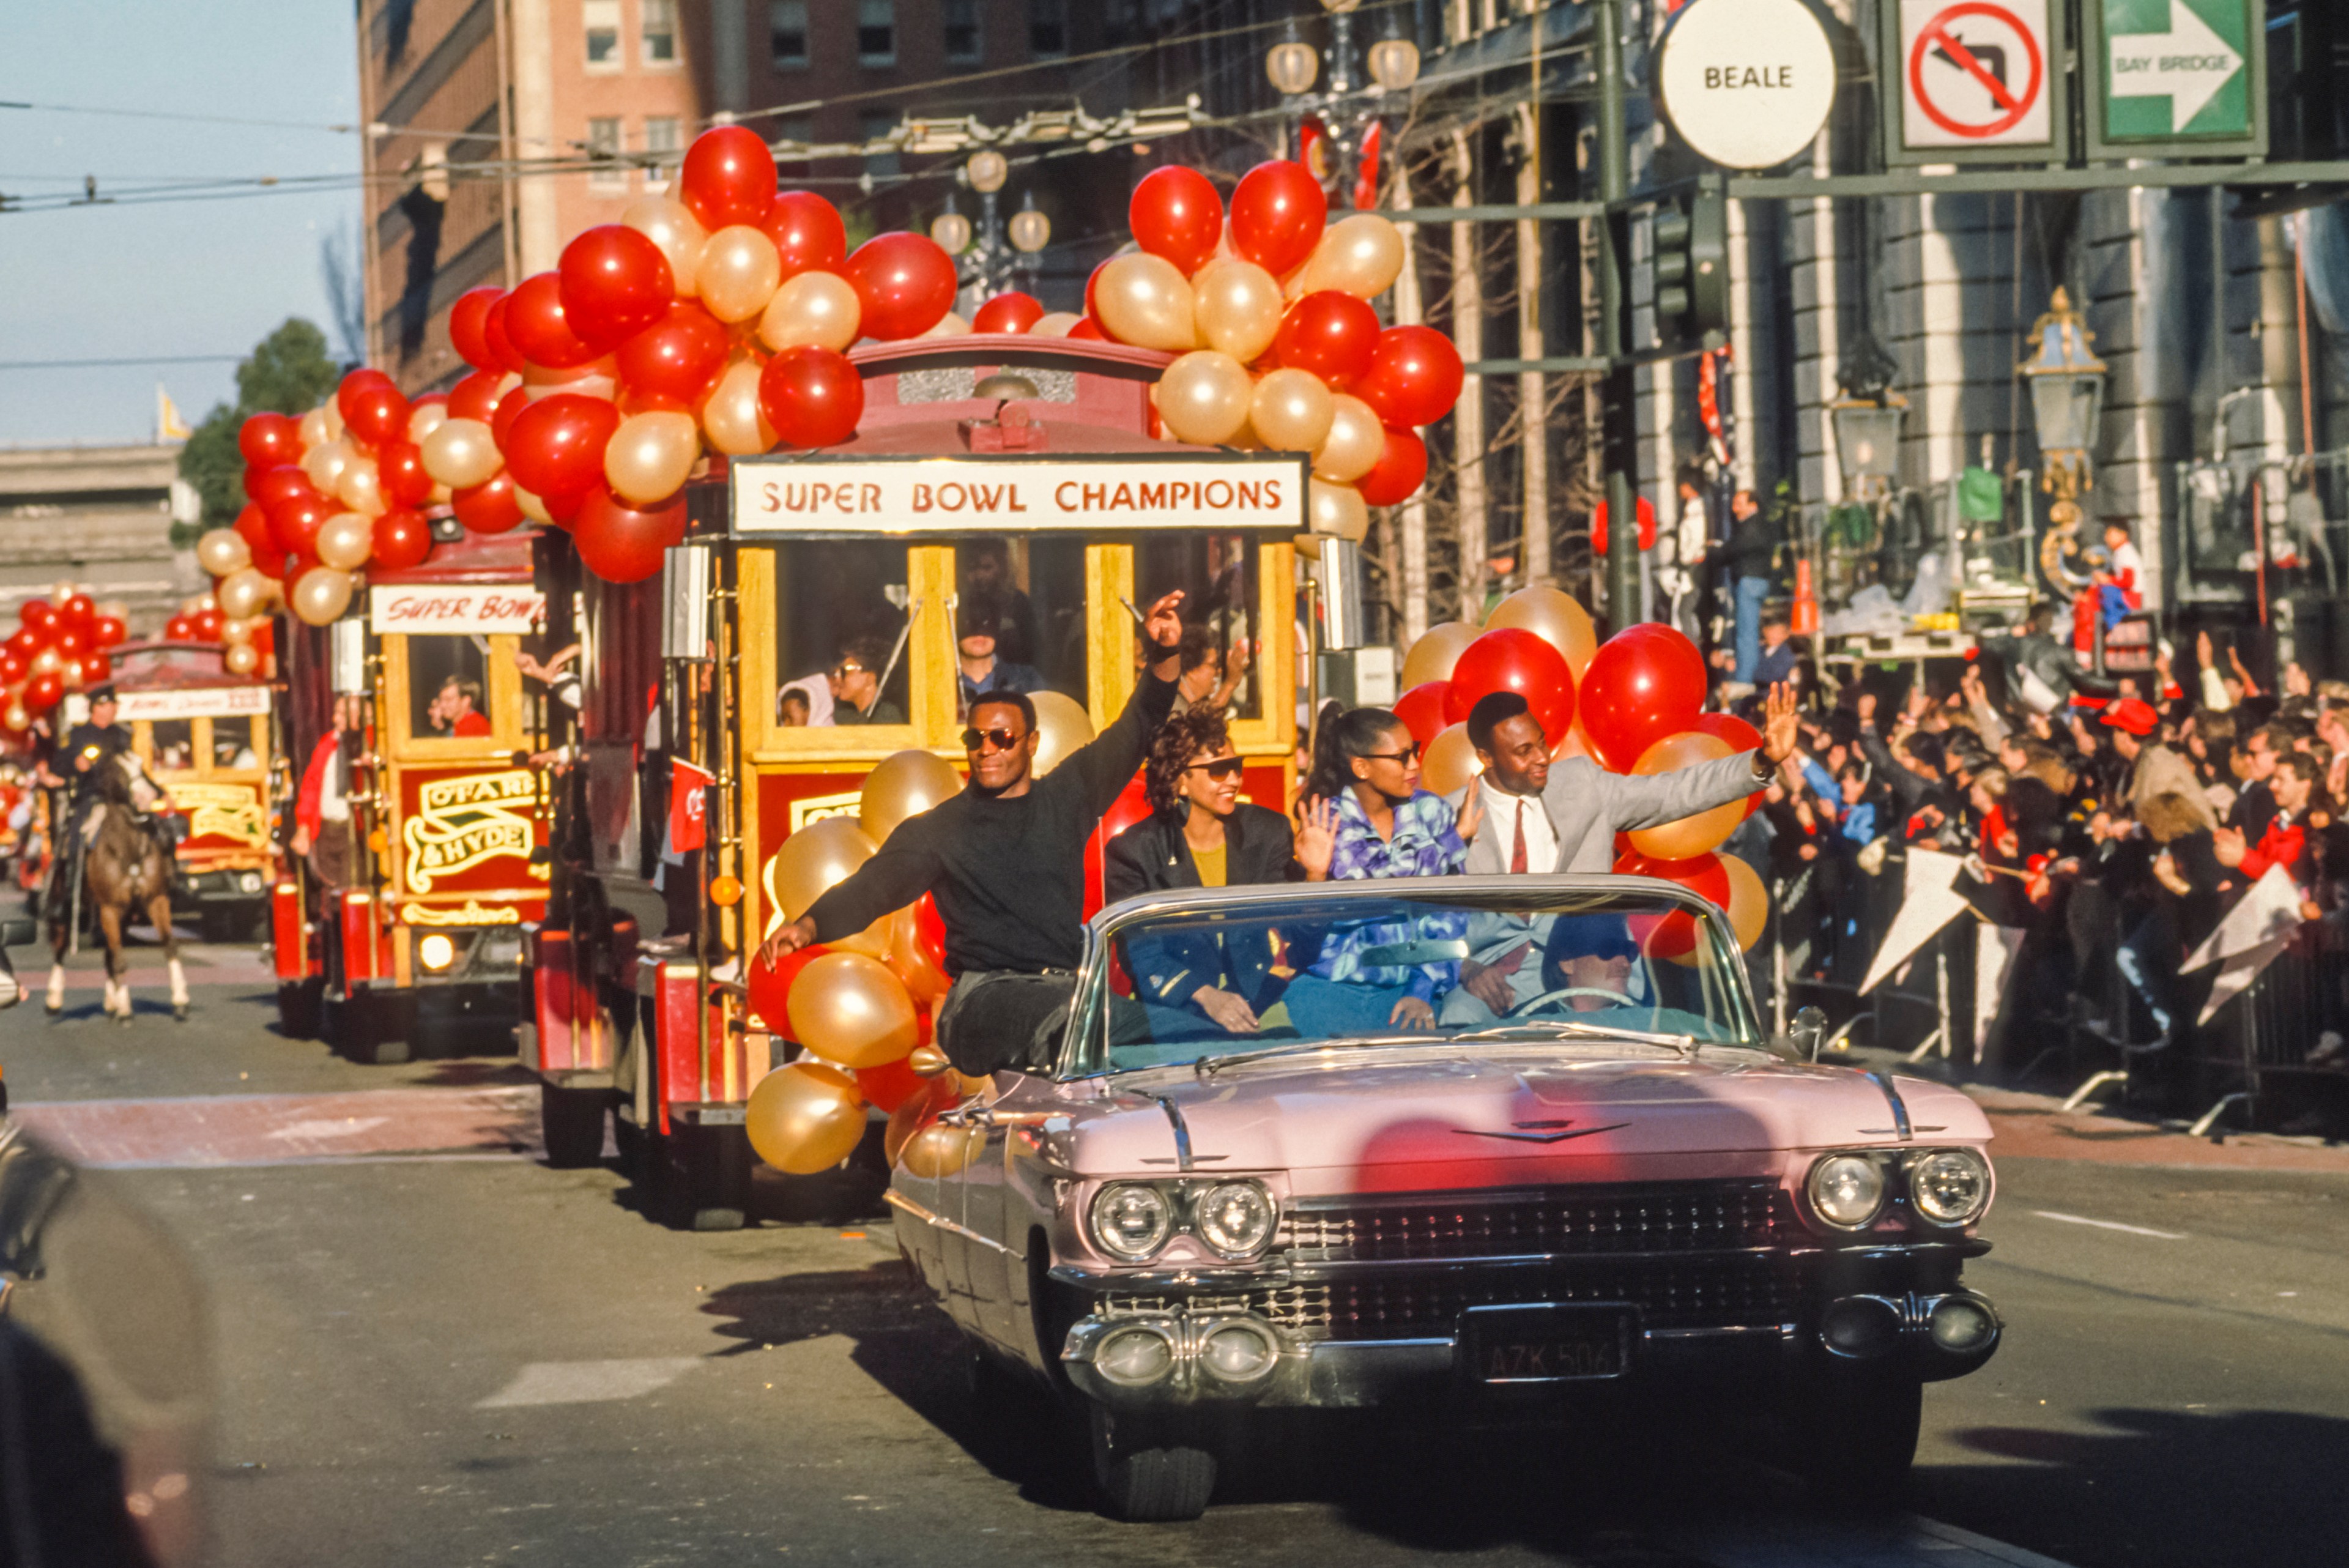 San Francisco 49ers players Roger Craig, left, Vernessia Craig, center left, Jacqueline Rice, center right, and Jerry Rice ride in the Super Bowl Champion parade down Market Street in San Francisco on Jan. 24, 1989 following the 49ers Super Bowl XXIII victory over the Cincinnati Bengals.